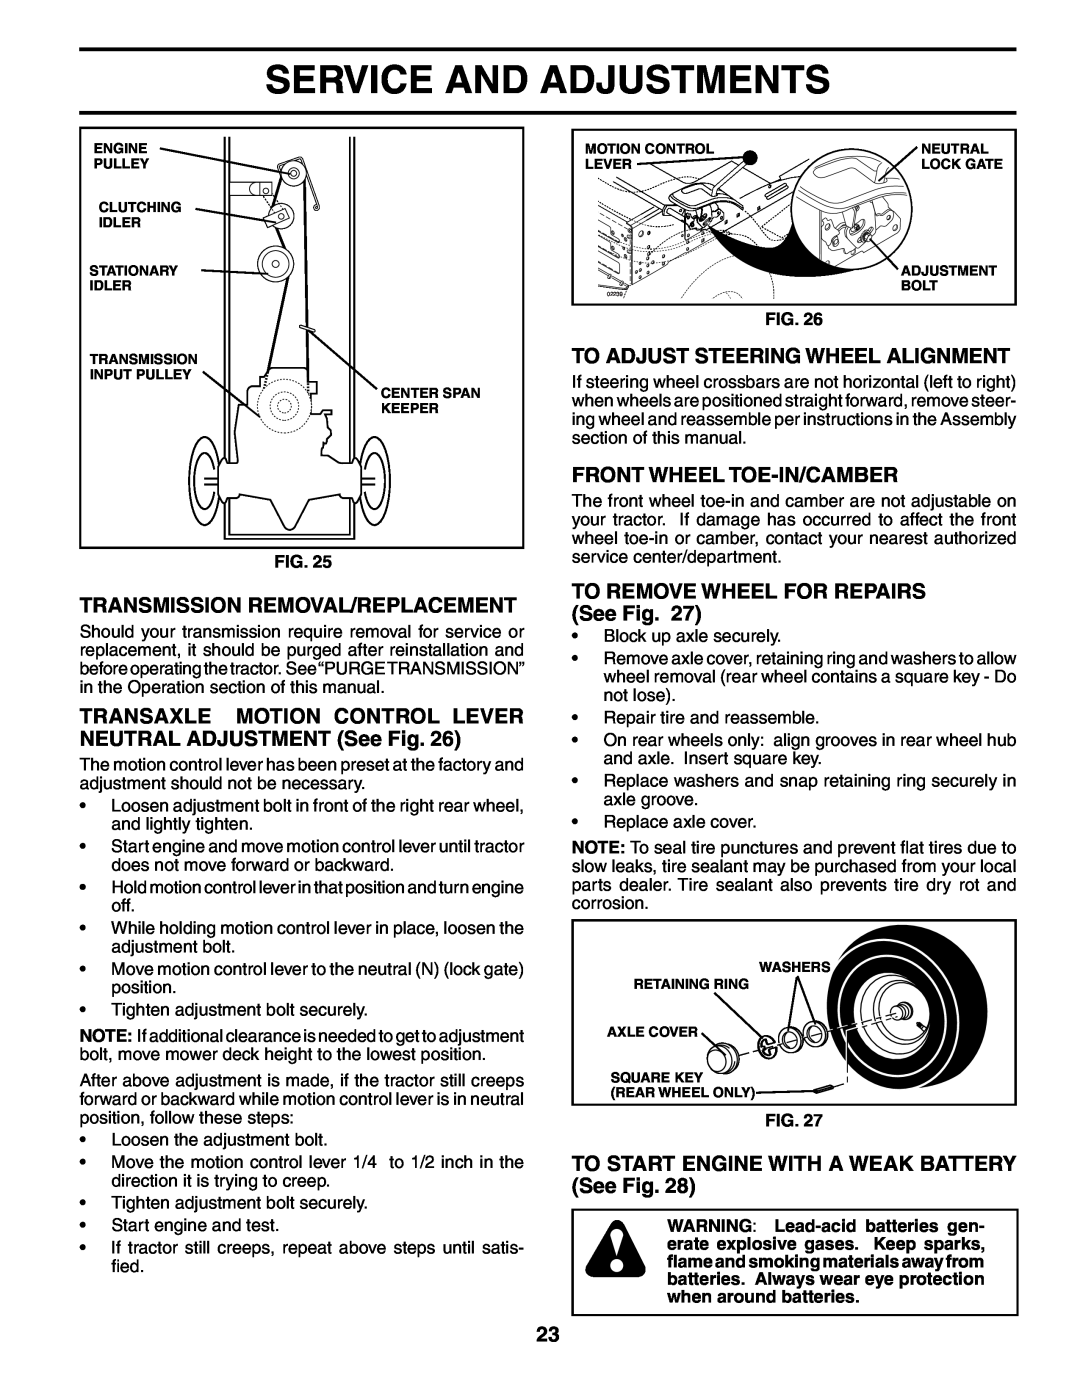 Poulan PD18H42STB owner manual Transmission Removal/Replacement, TRANSAXLE MOTION CONTROL LEVER NEUTRAL ADJUSTMENT See Fig 